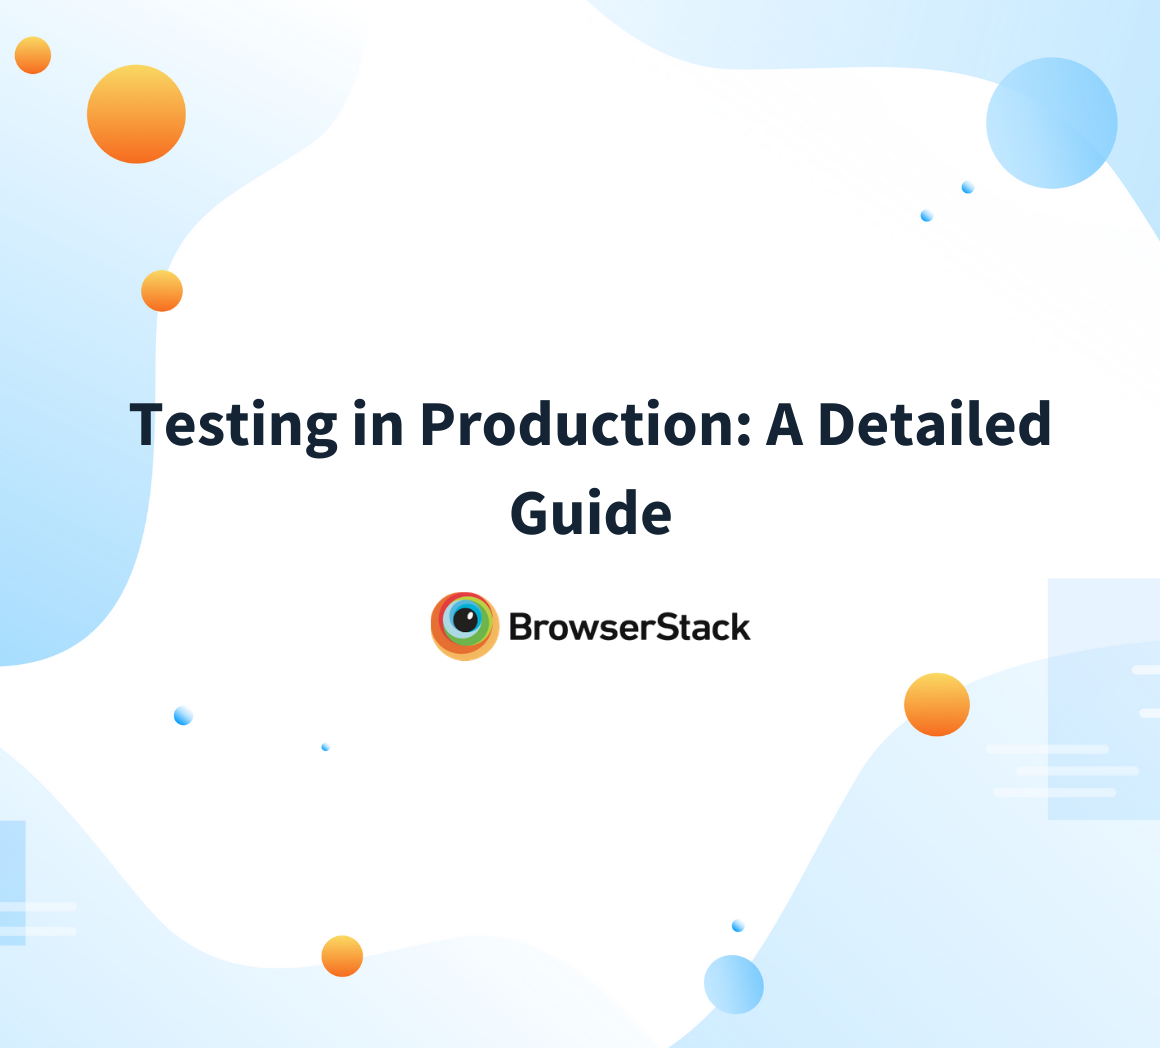 Testing in Production: A Detailed Guide